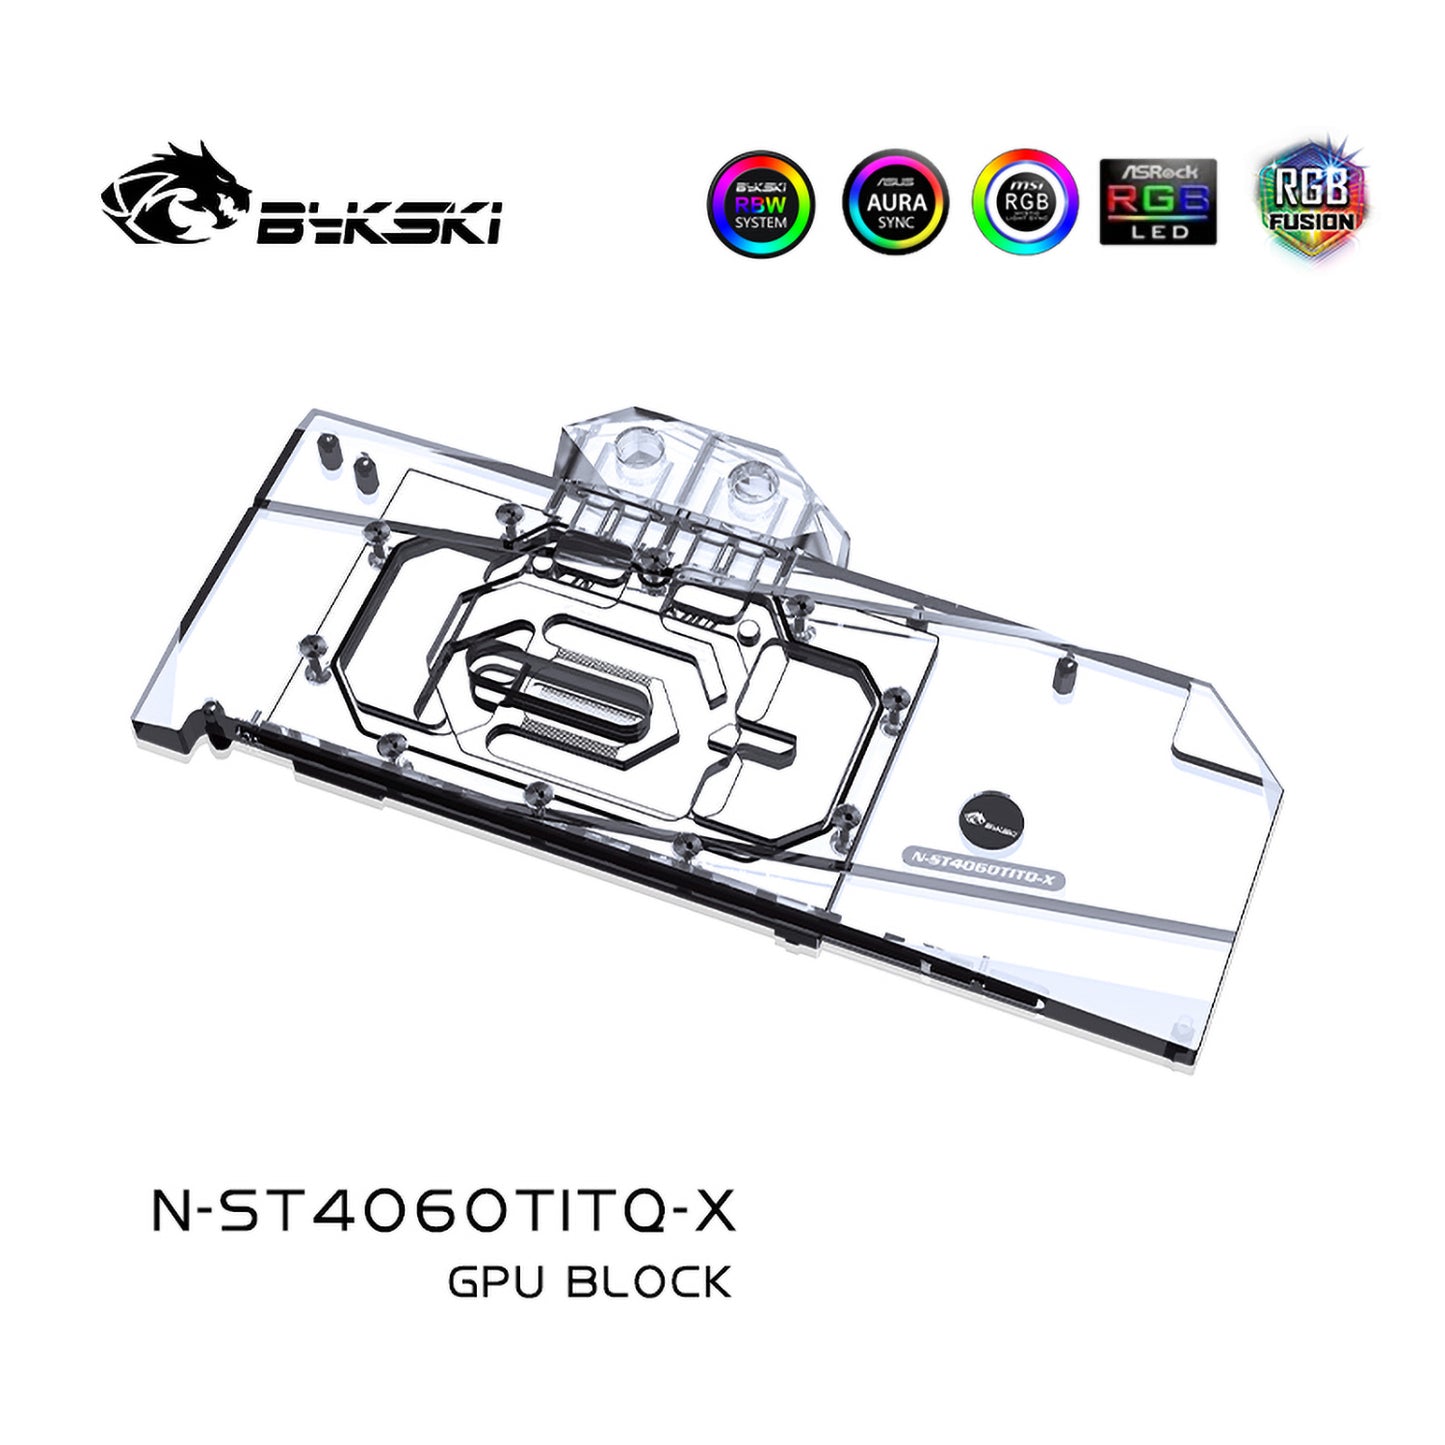 Bykski GPU Water Block For Zotac RTX 4060 Ti Apocalypse OC, Full Cover With Backplate PC Water Cooling Cooler, N-ST4060TITQ-X